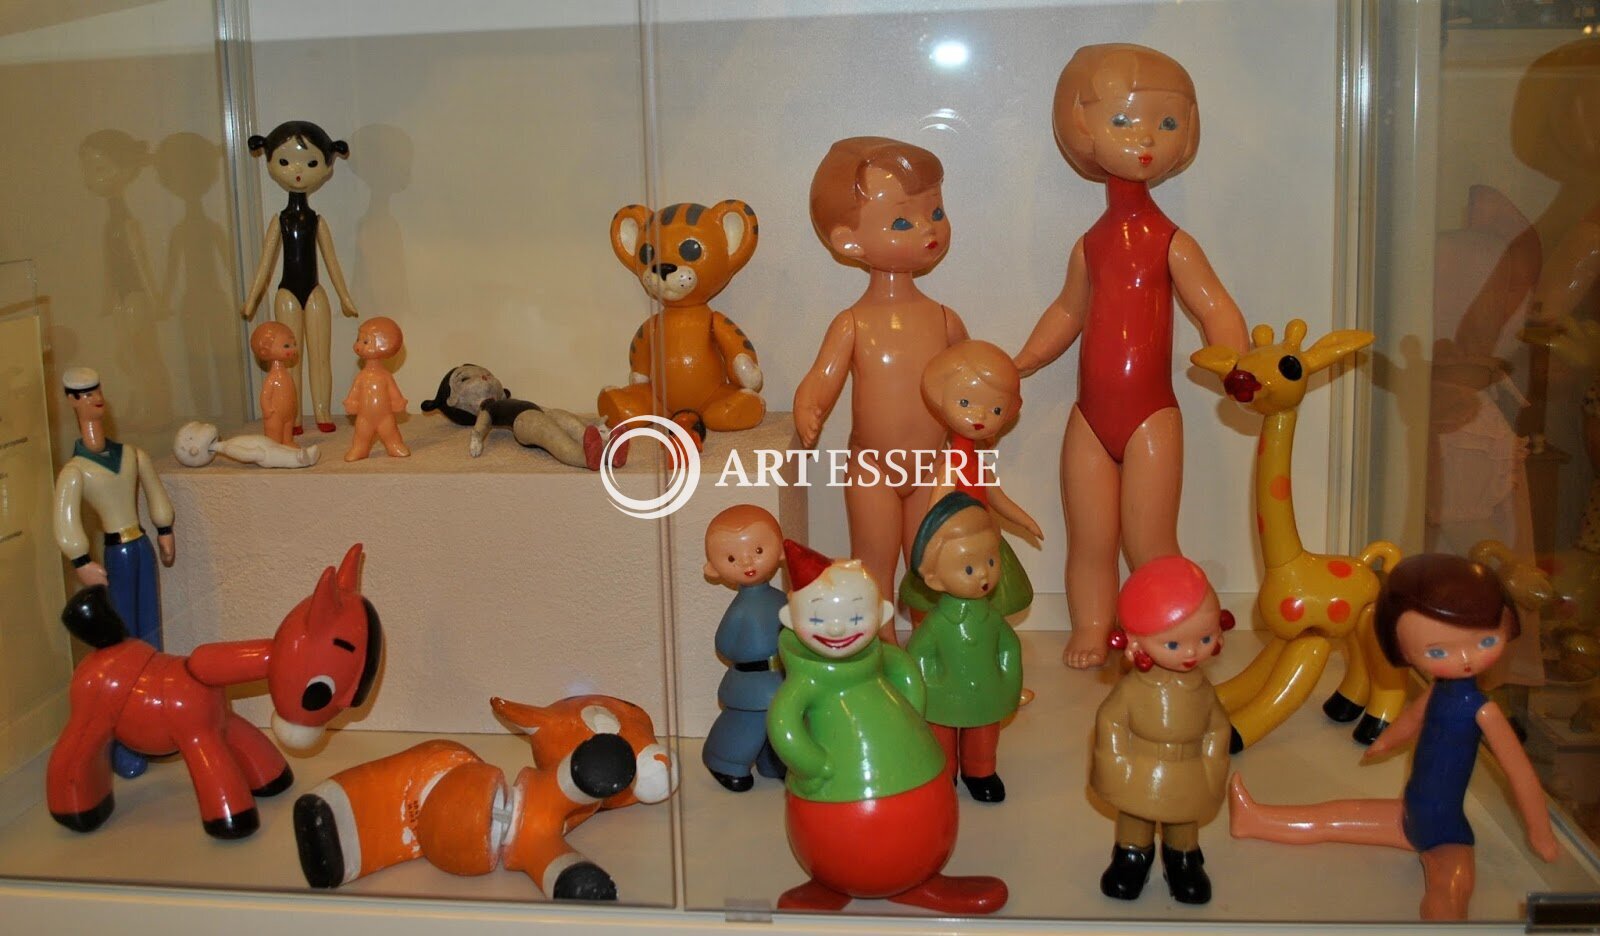 The St. Petersburg Museum of Toys